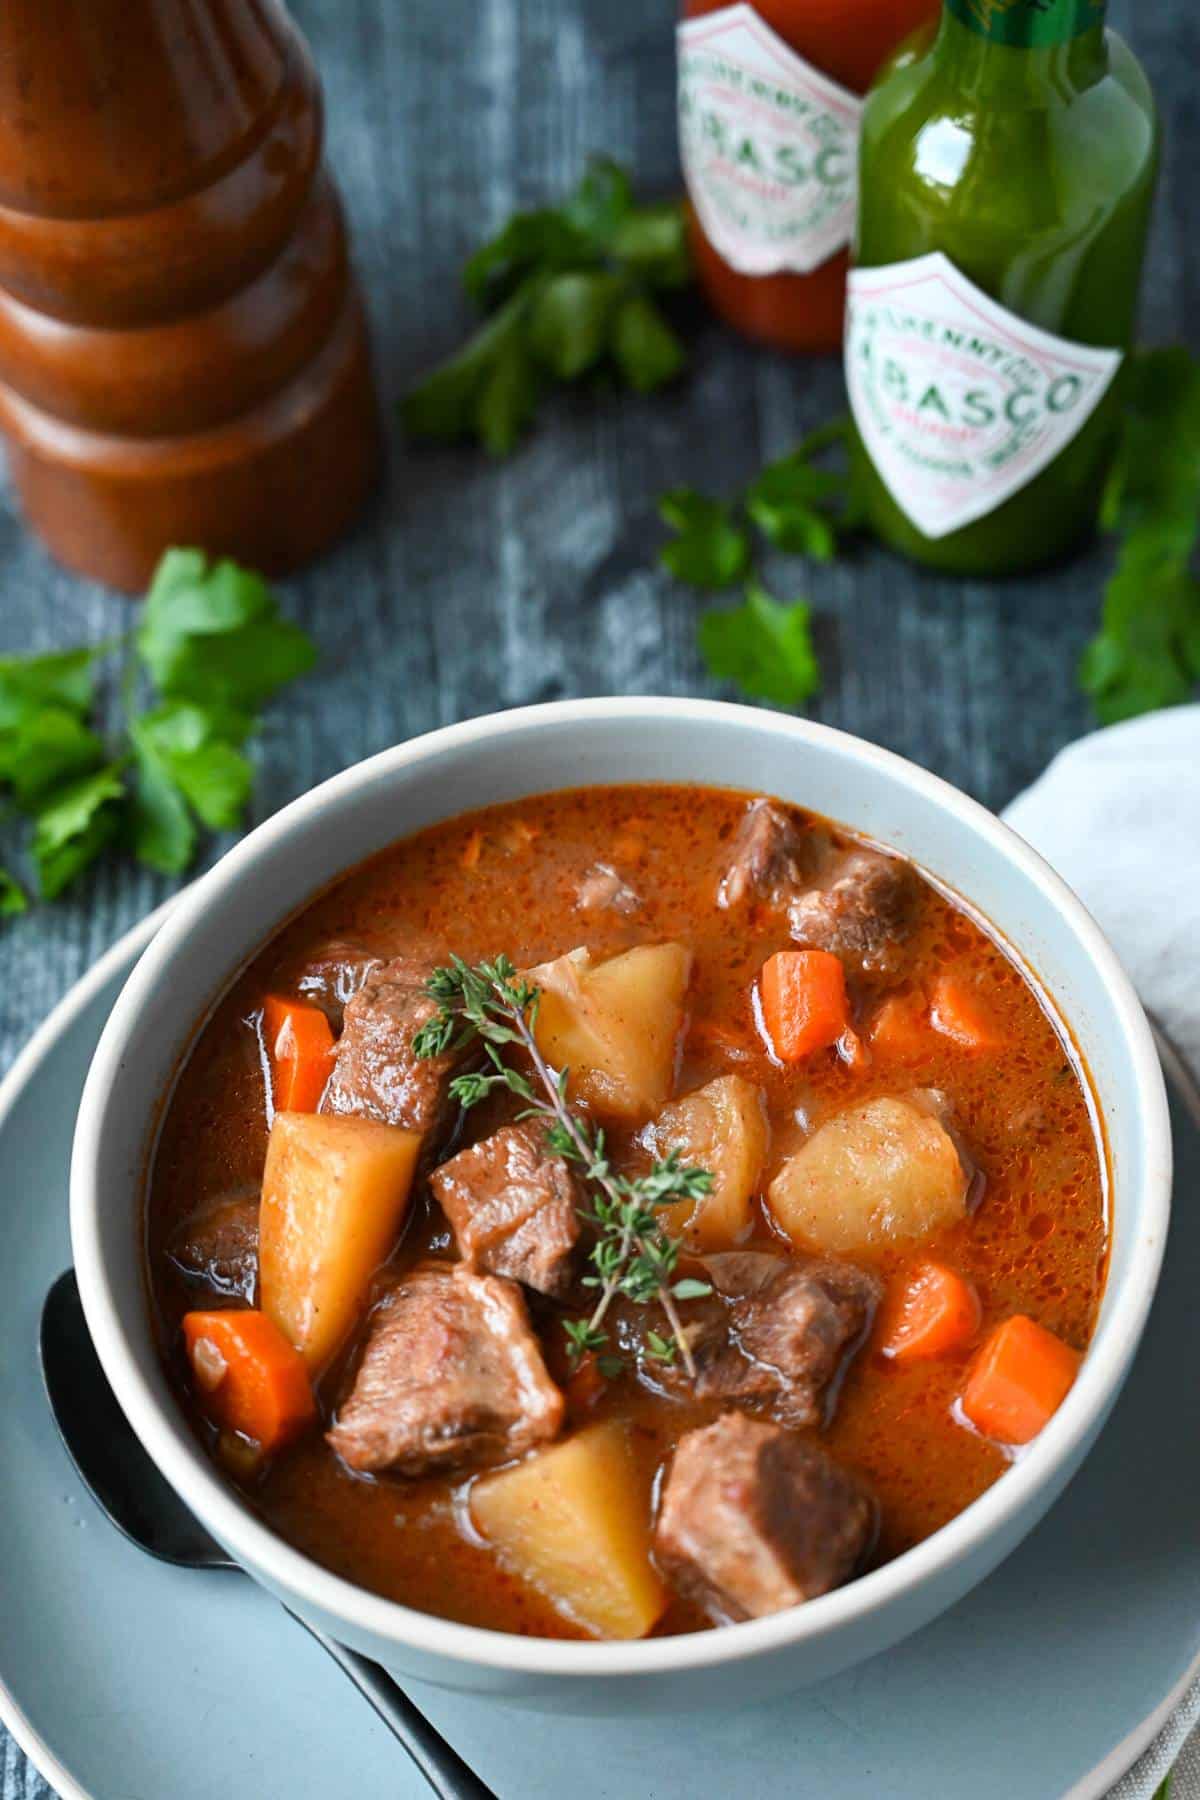 beef stew in a gray bowl with a spoon with a peppermill, fresh herbs and seasonings in the background